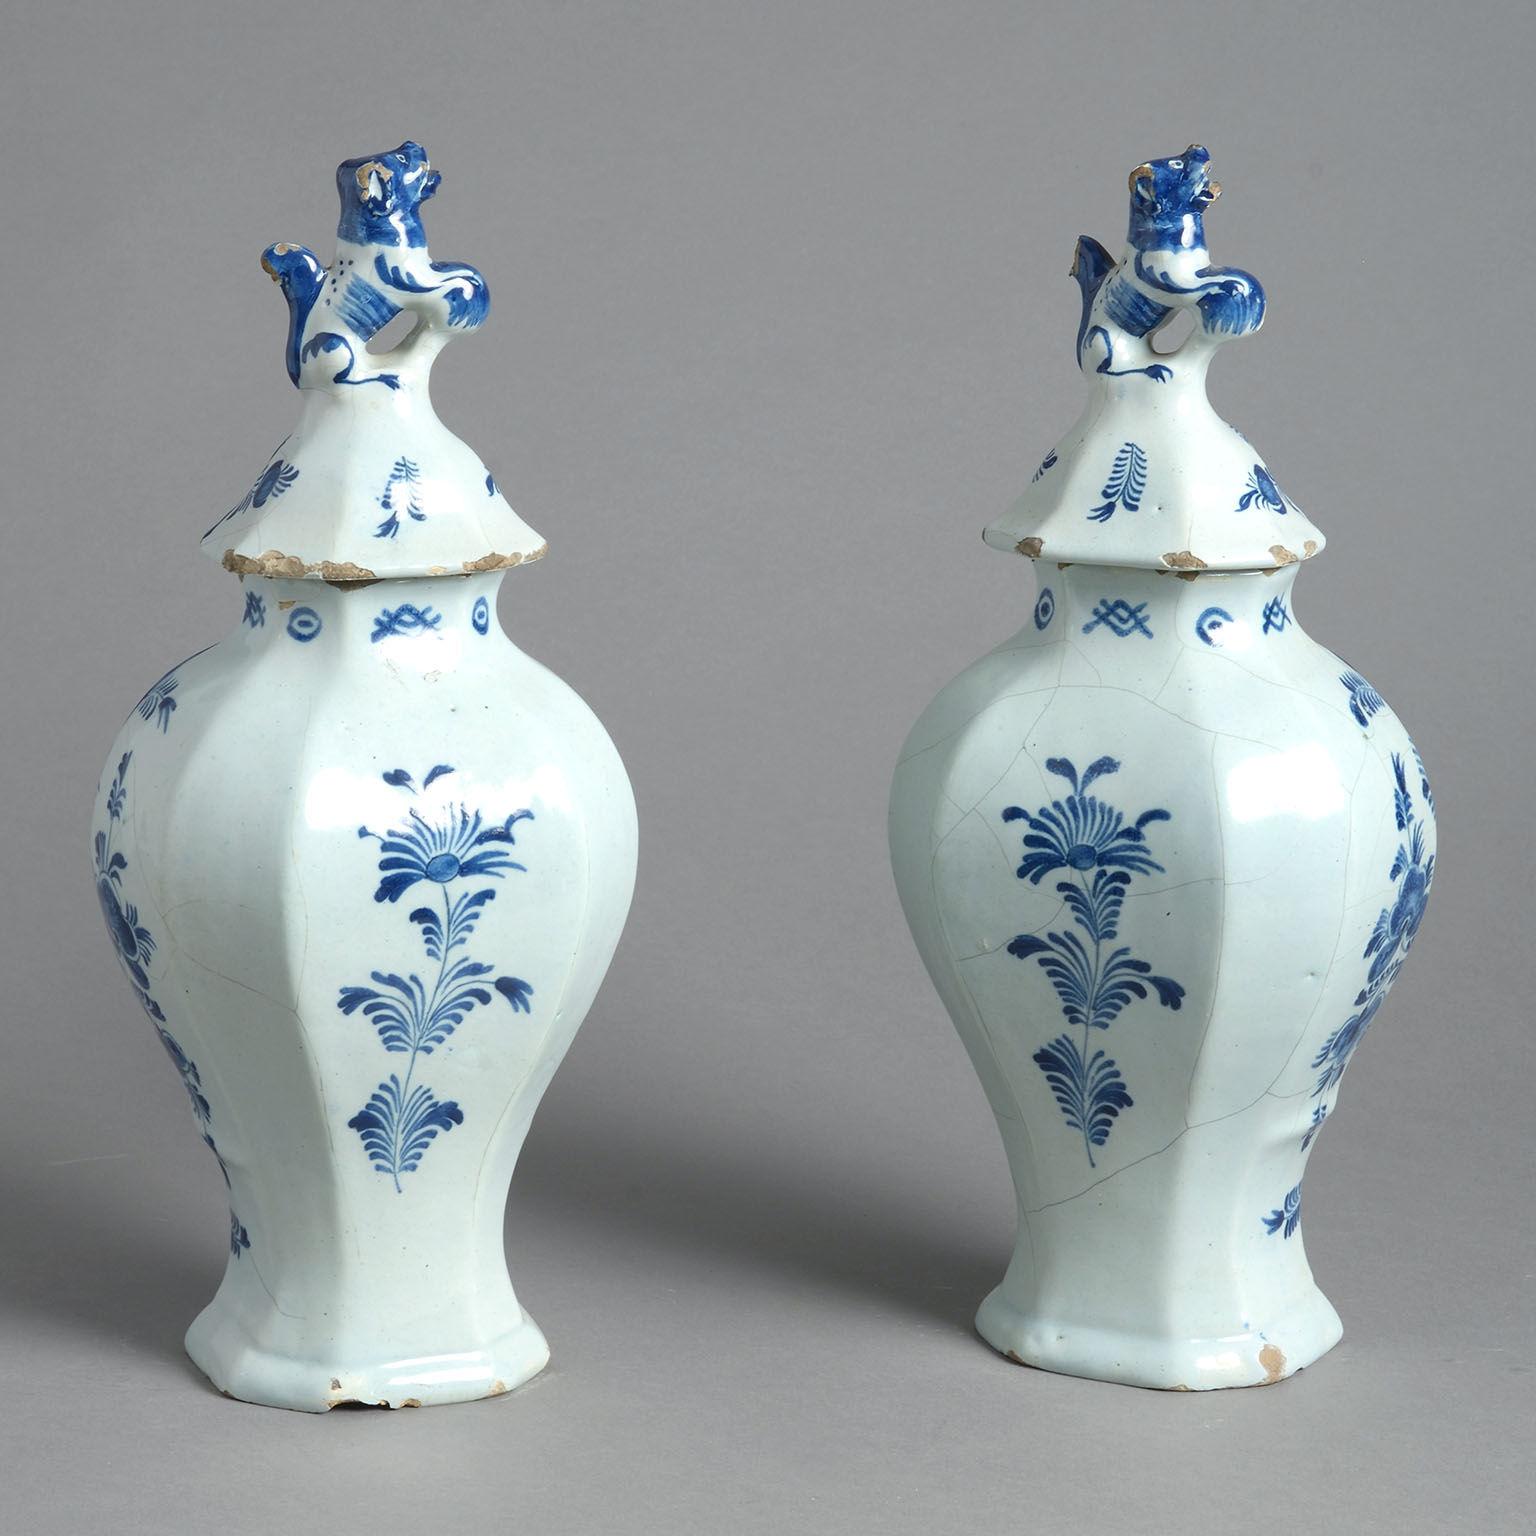 A pair of signed 18th century delft lidded vases, the baluster forms painted with roses within a molded Rococo cartouche in blue on a white ground. Surmounted by domed covers with dog finials. Signed by Johannes Harlees.